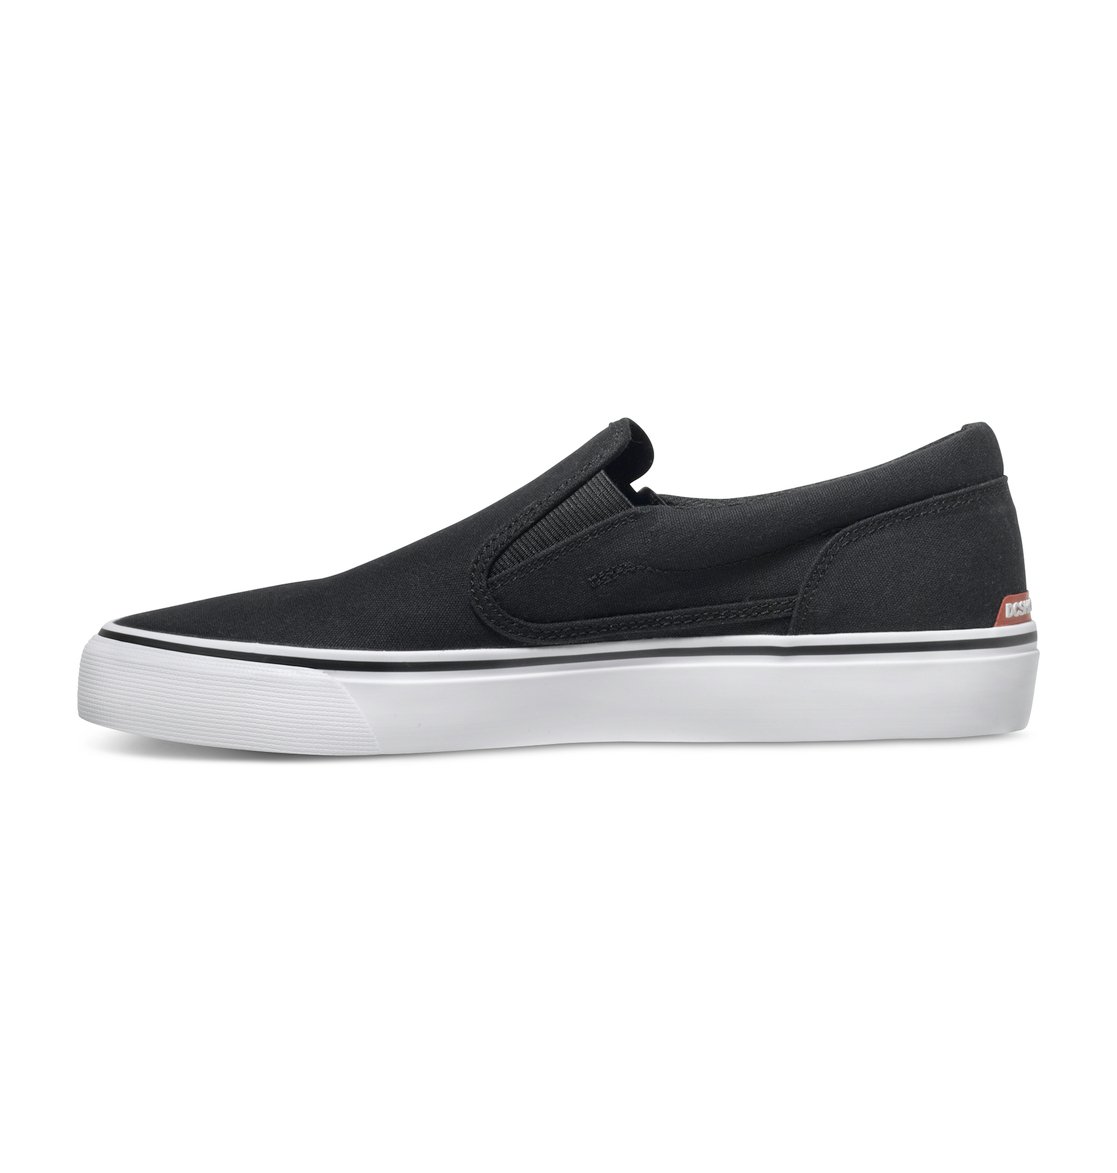 Trase Slip On Shoes ADYS300184 | DC Shoes